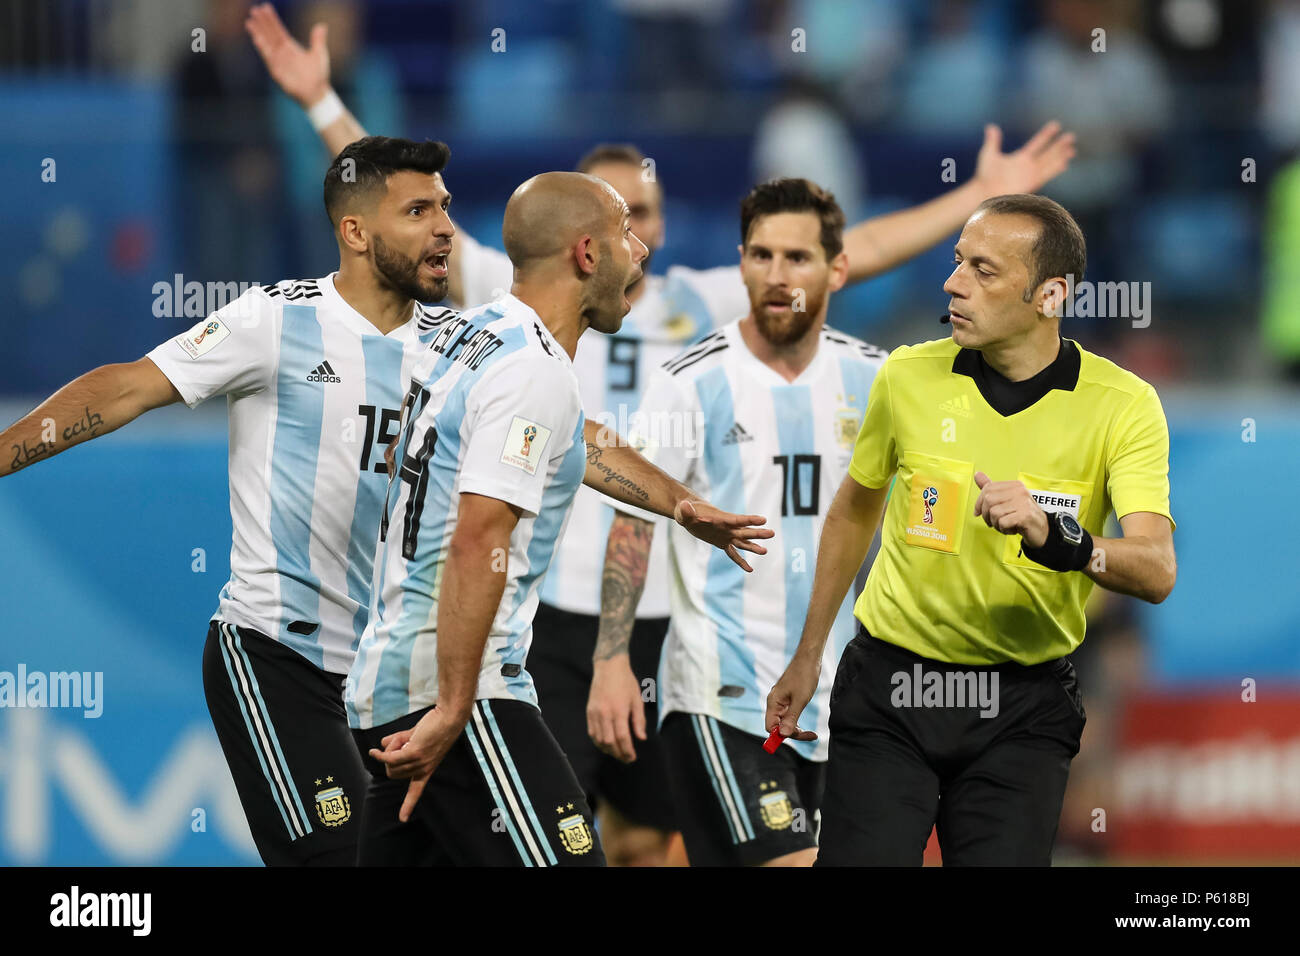 St Petersburg, Russia. 26th Jun, 2018. Javier Mascherano of Argentina and Sergio Aguero of Argentina react to referee Cuneyt Cakir during the 2018 FIFA World Cup Group D match between Nigeria and Argentina at Saint Petersburg Stadium on June 26th 2018 in Saint Petersburg, Russia. (Photo by Daniel Chesterton/phcimages.com) Credit: PHC Images/Alamy Live News Stock Photo